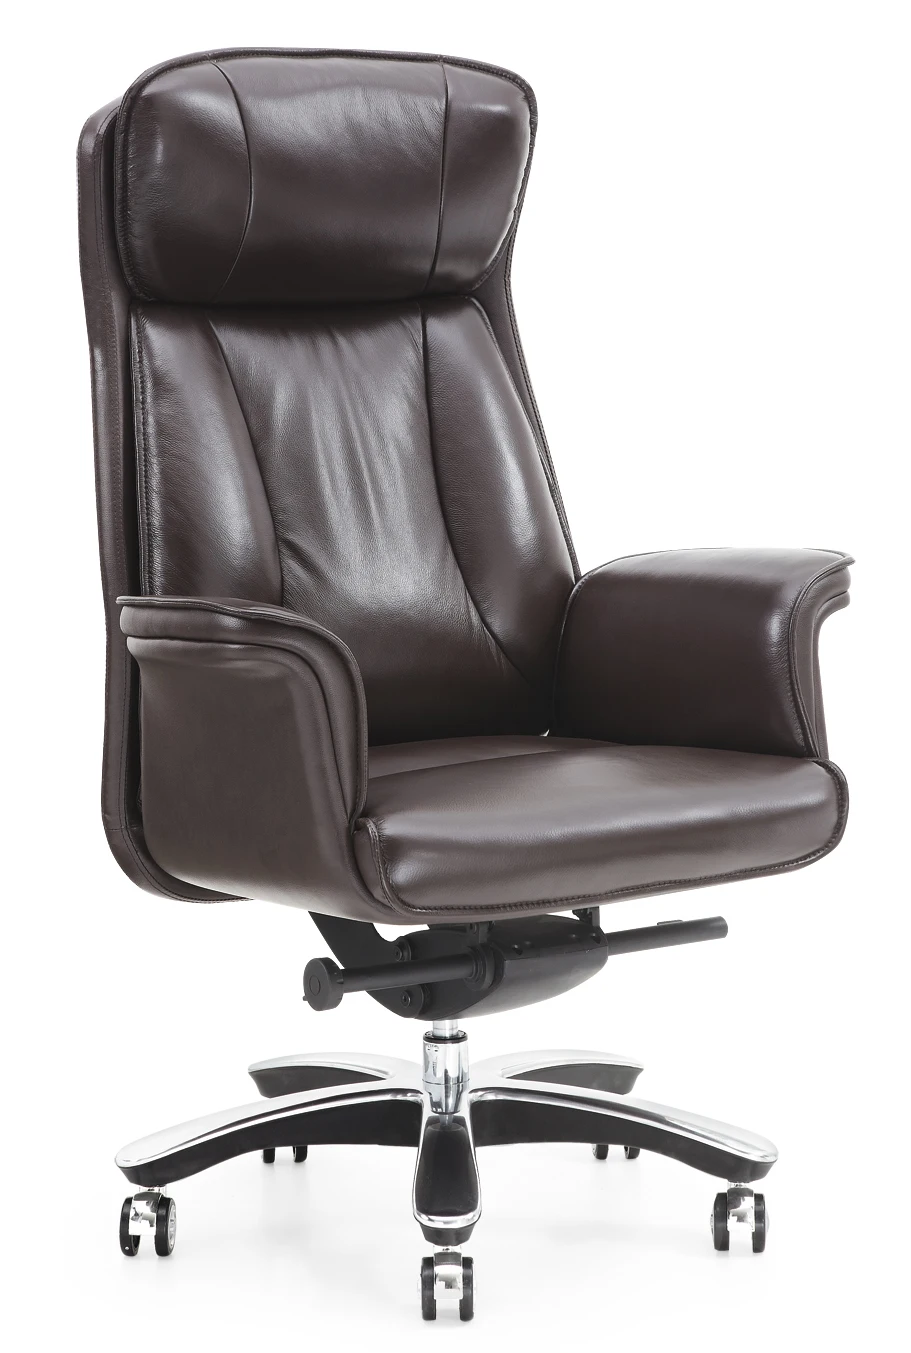 Top Grain Brown Leather Office Chair Boss Chair - Buy Luxury Leather